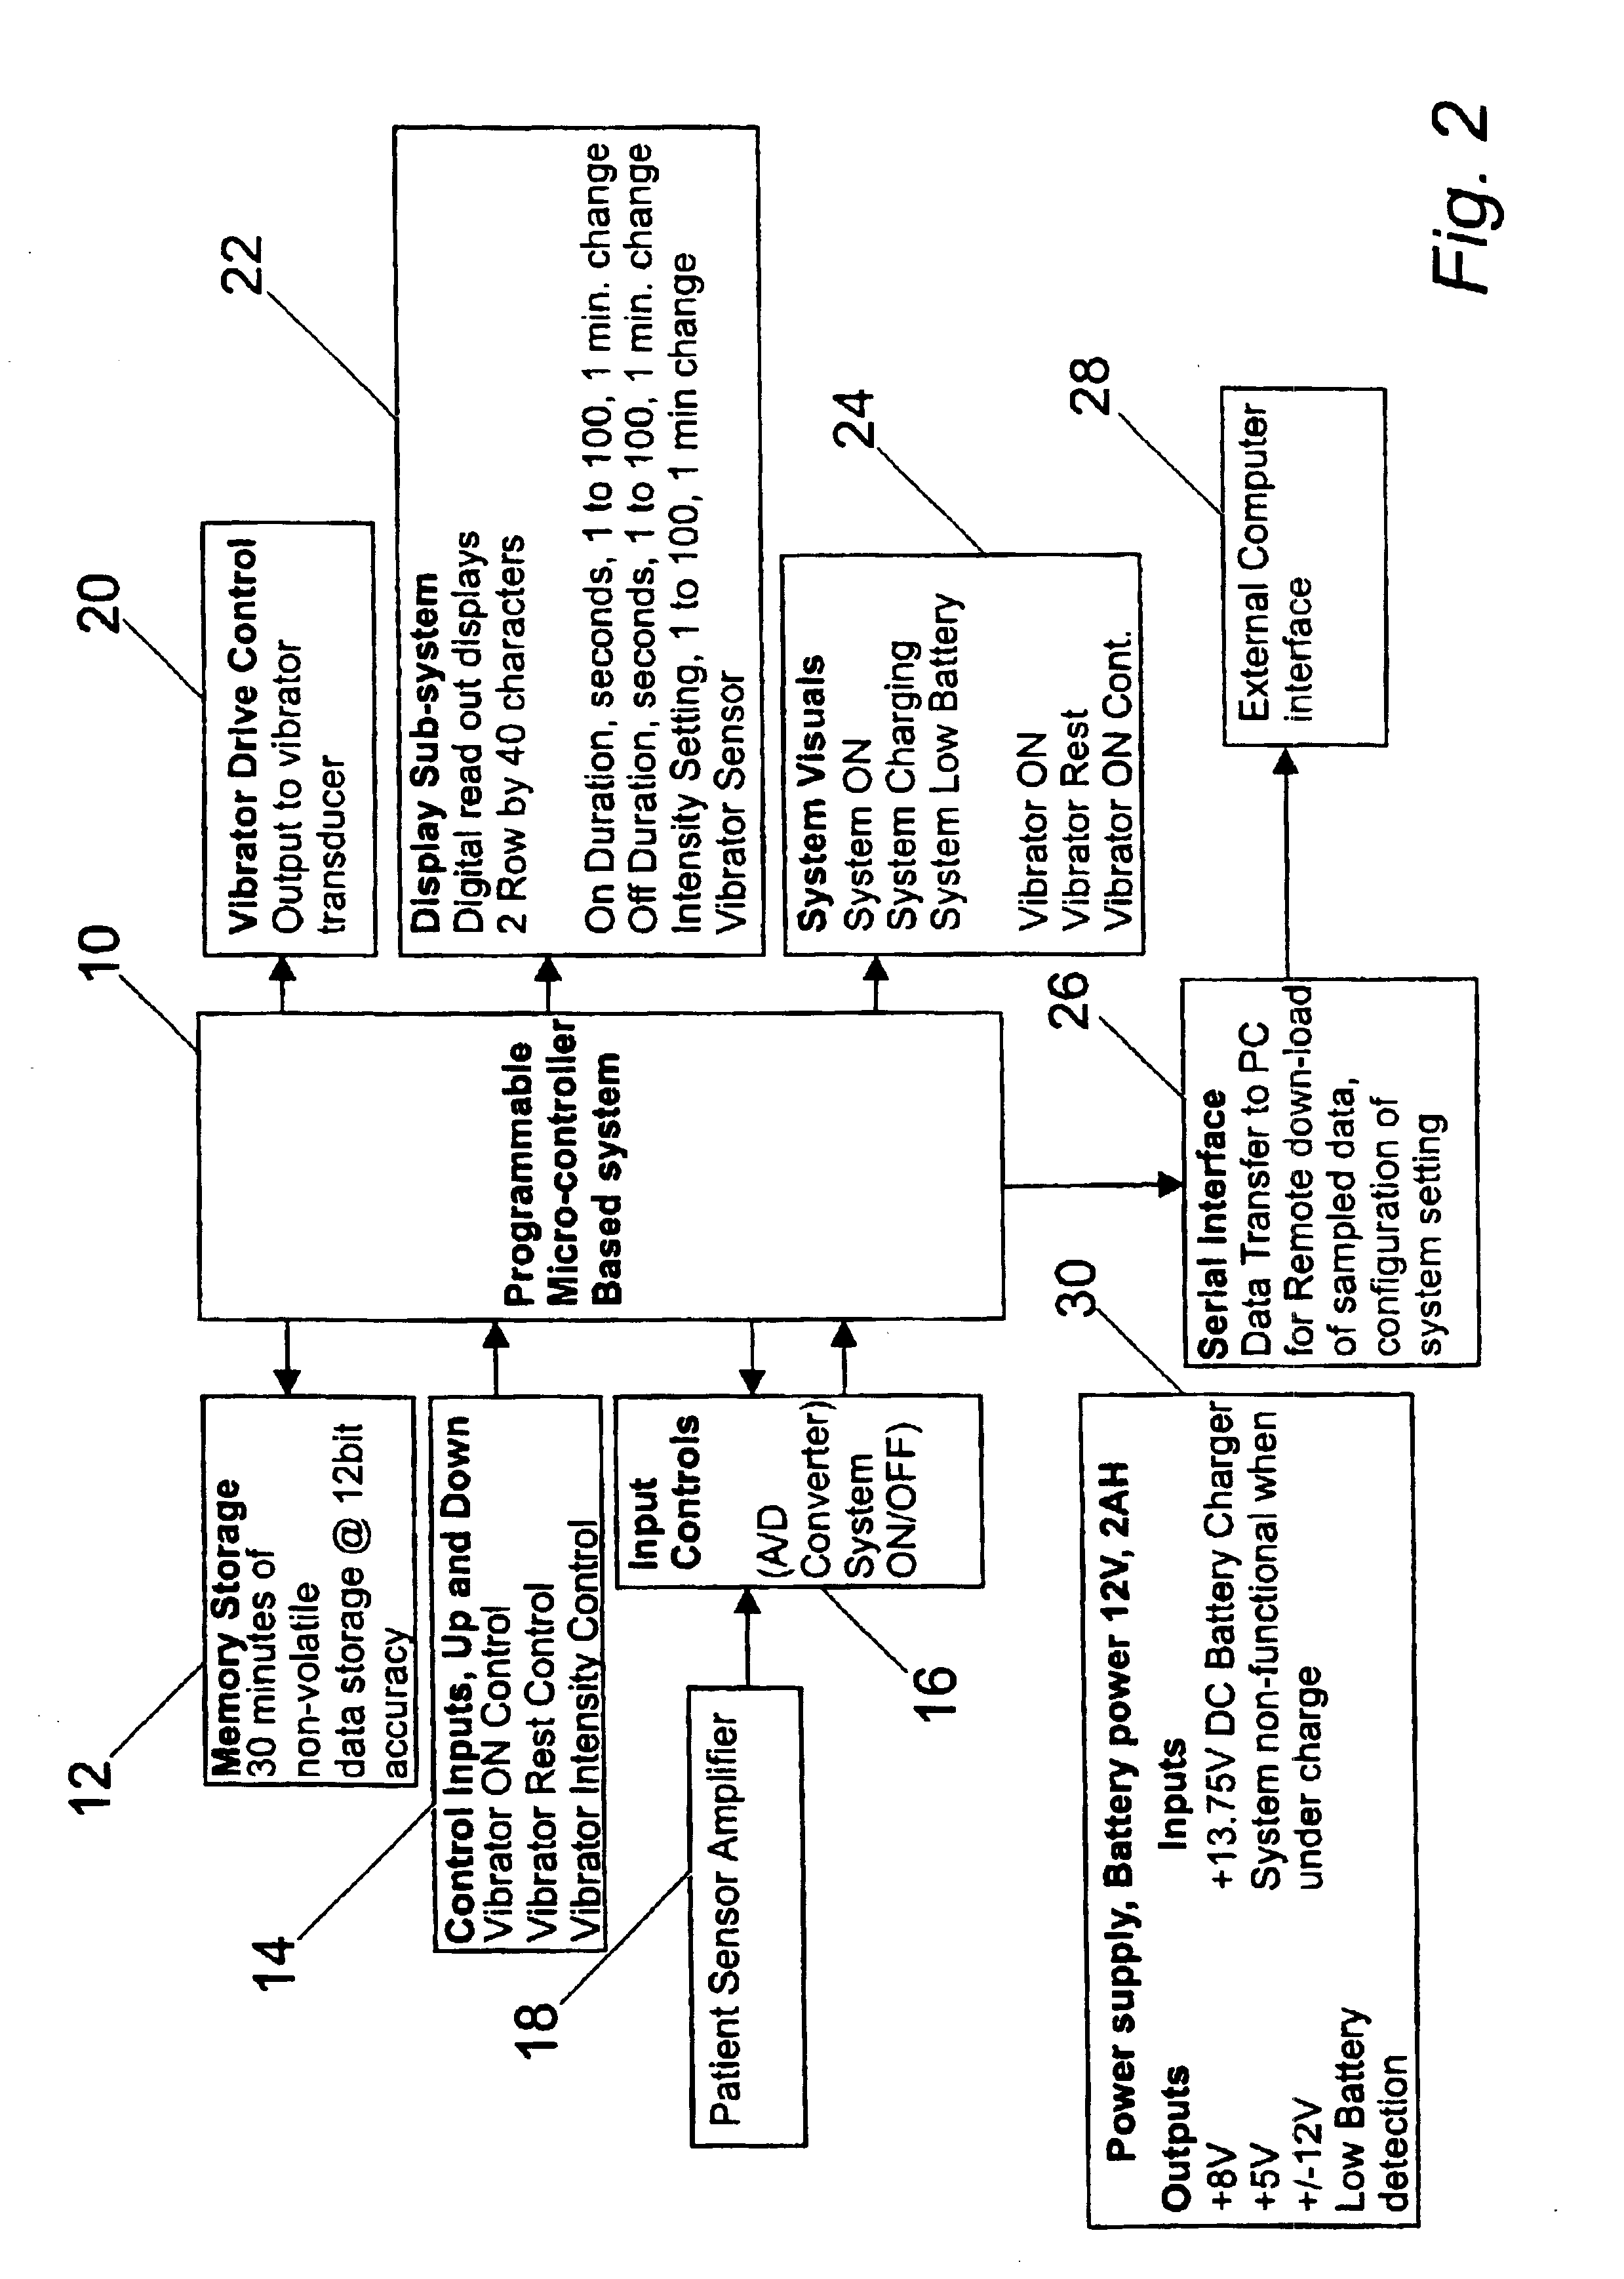 Apparatus and method to assist in the diagnosis of premature ejaculation